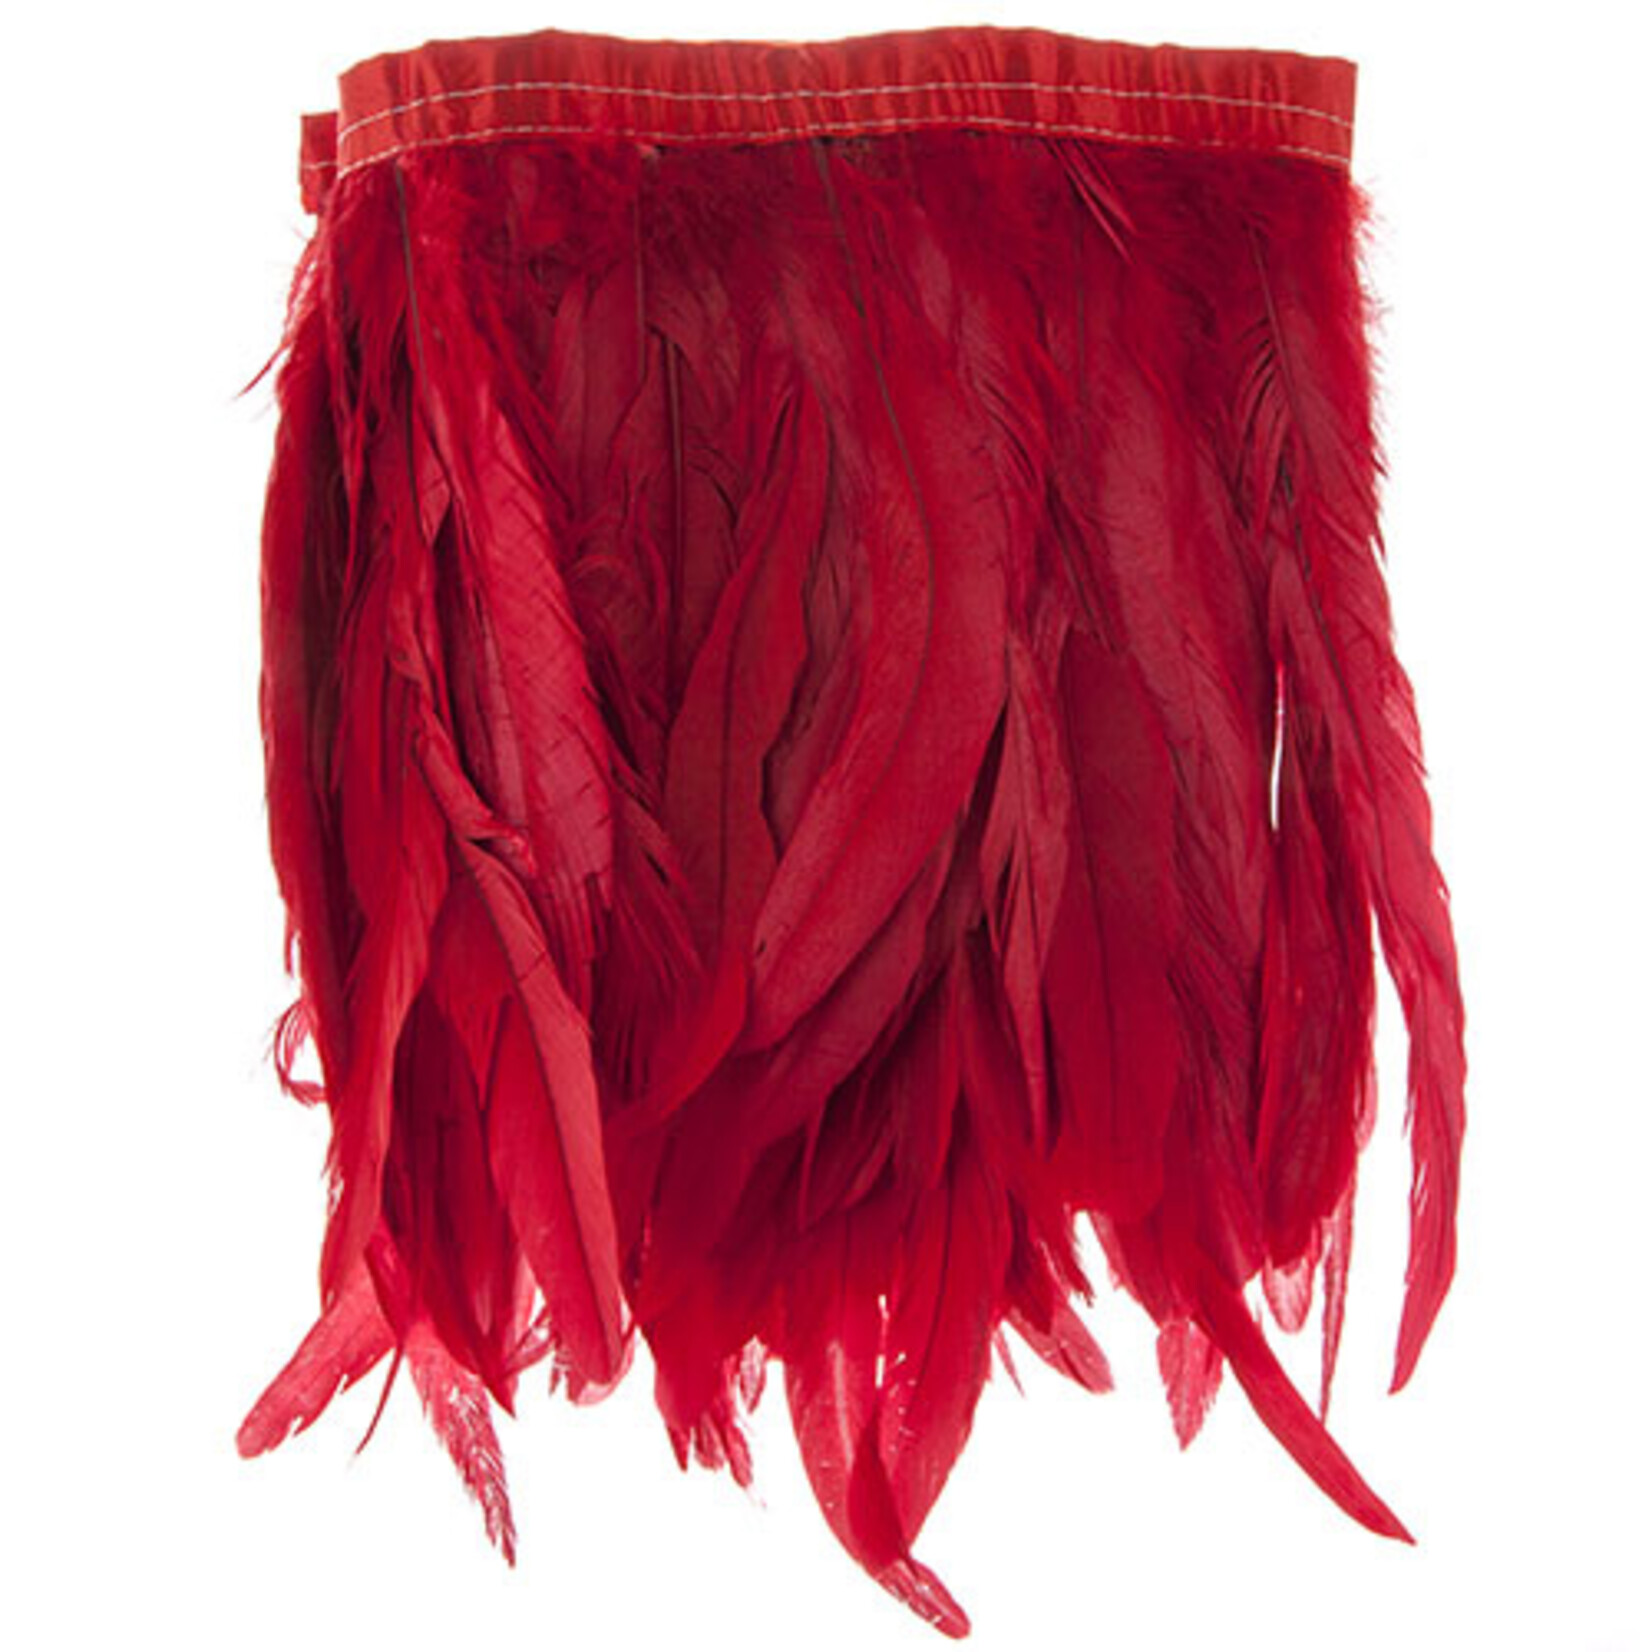 Coque Feathers Value 10-12 Inches 1 Yard  Red